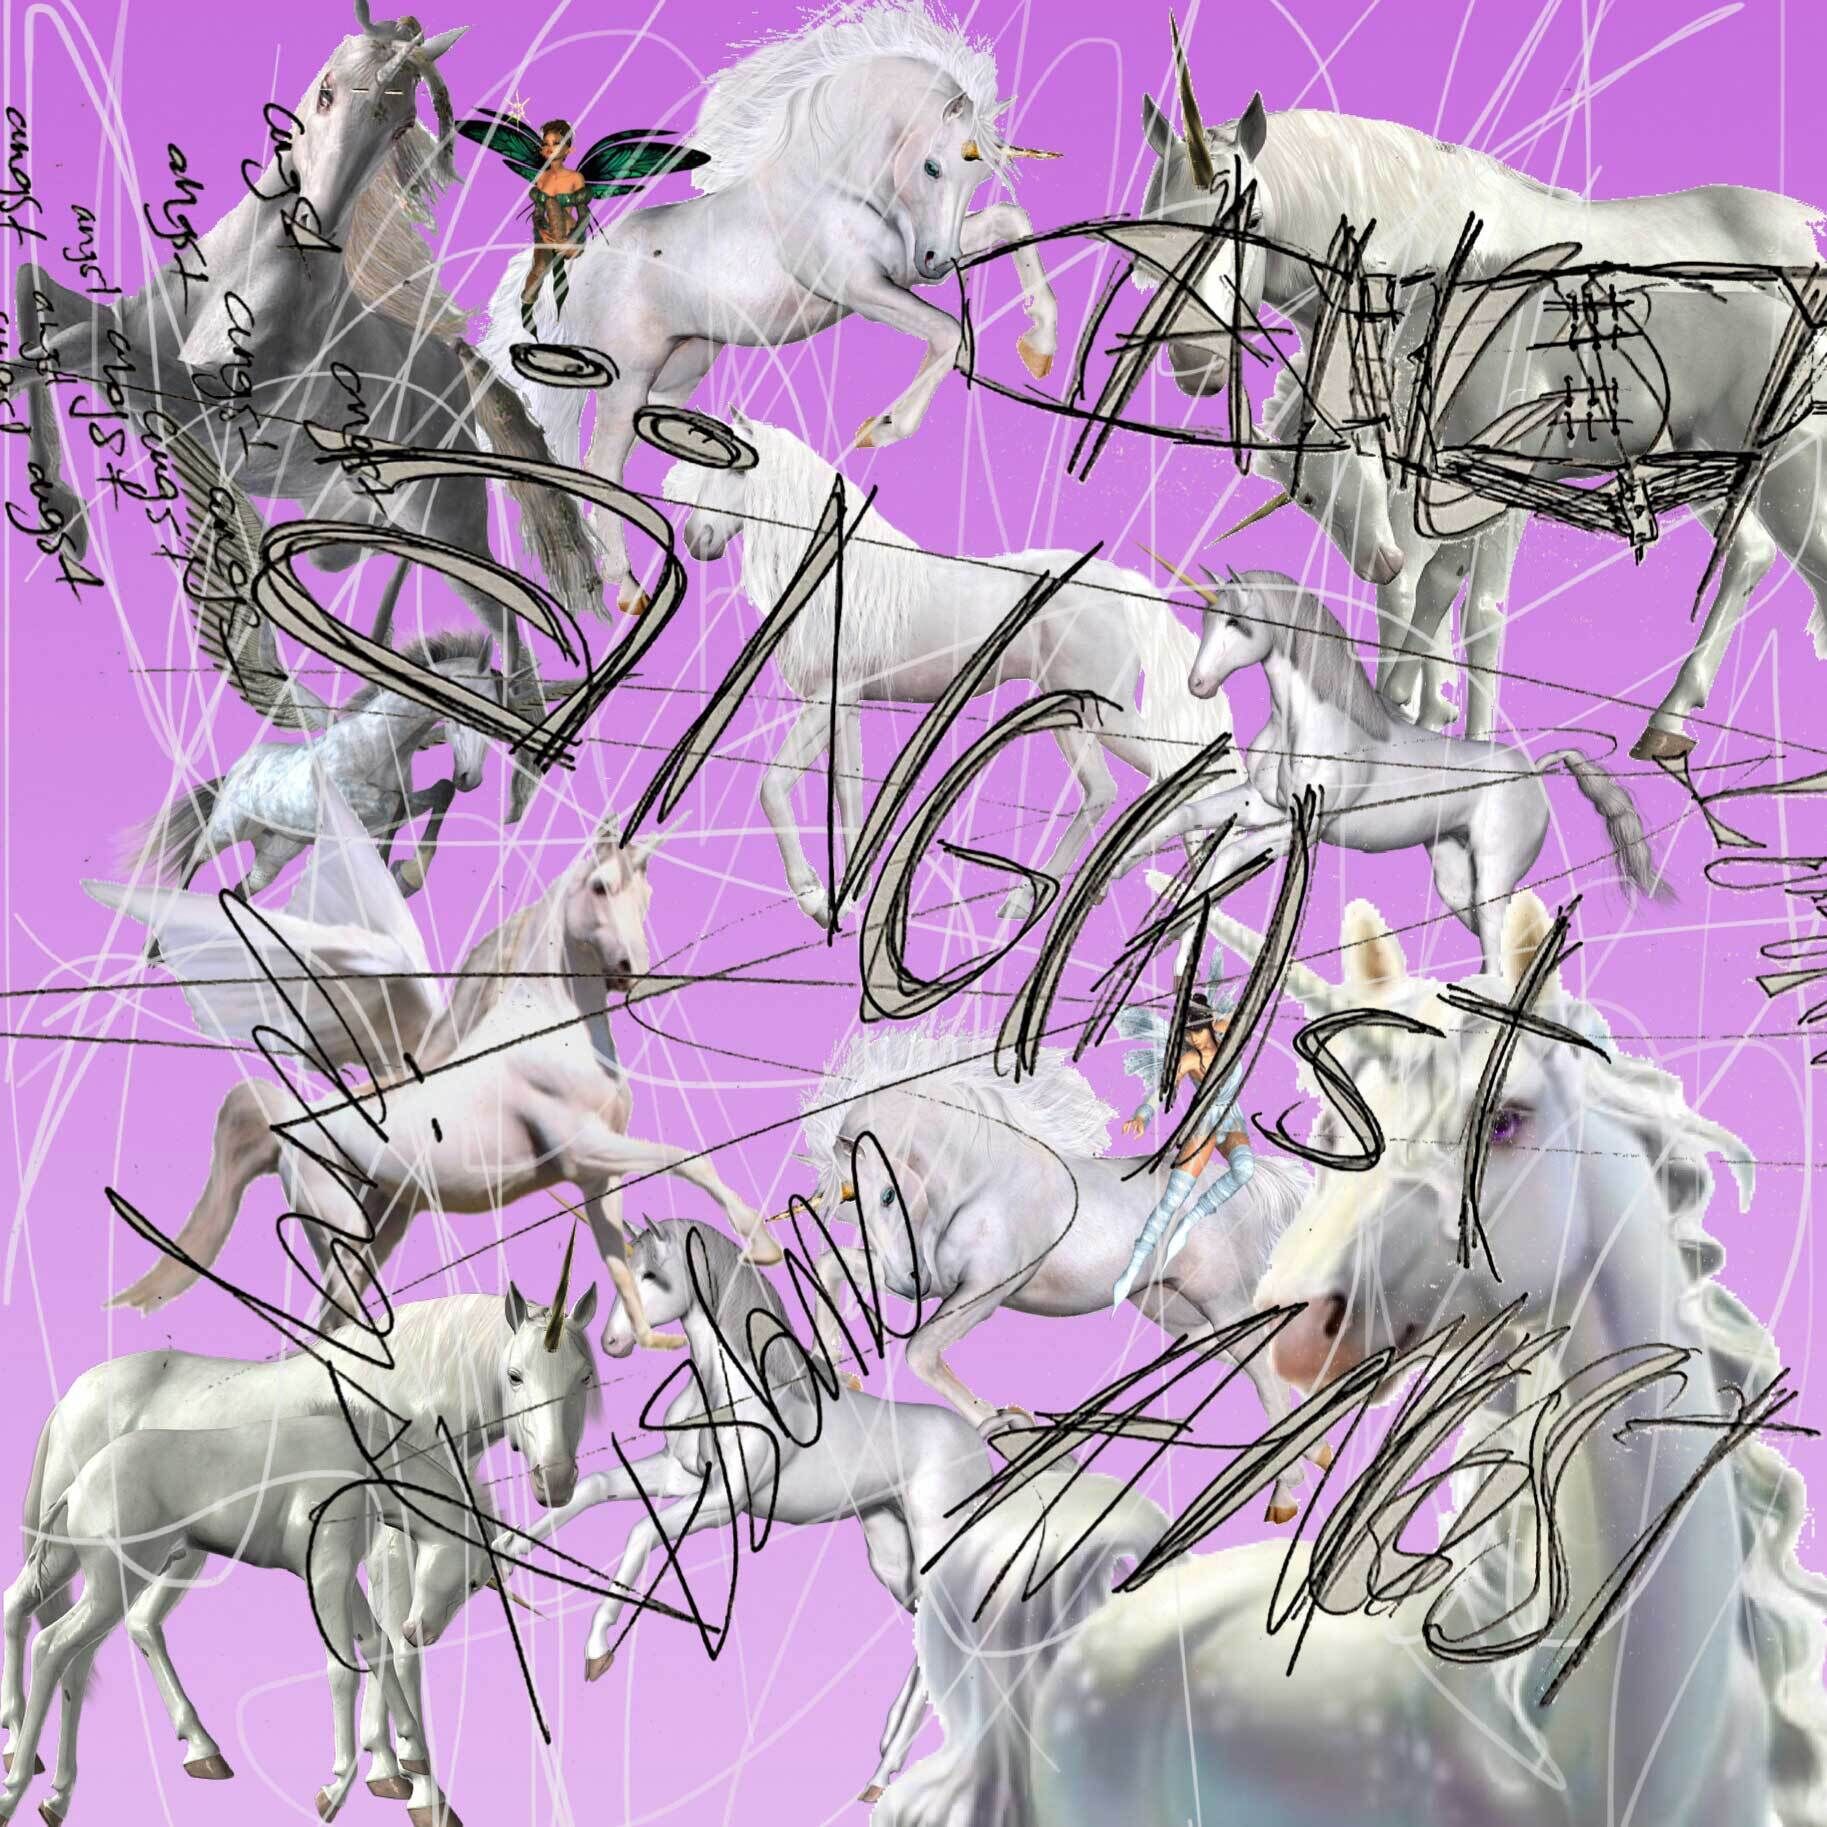 White unicorns on a vivid purple background with the word "angst" scrawled over them repeatedly in black.